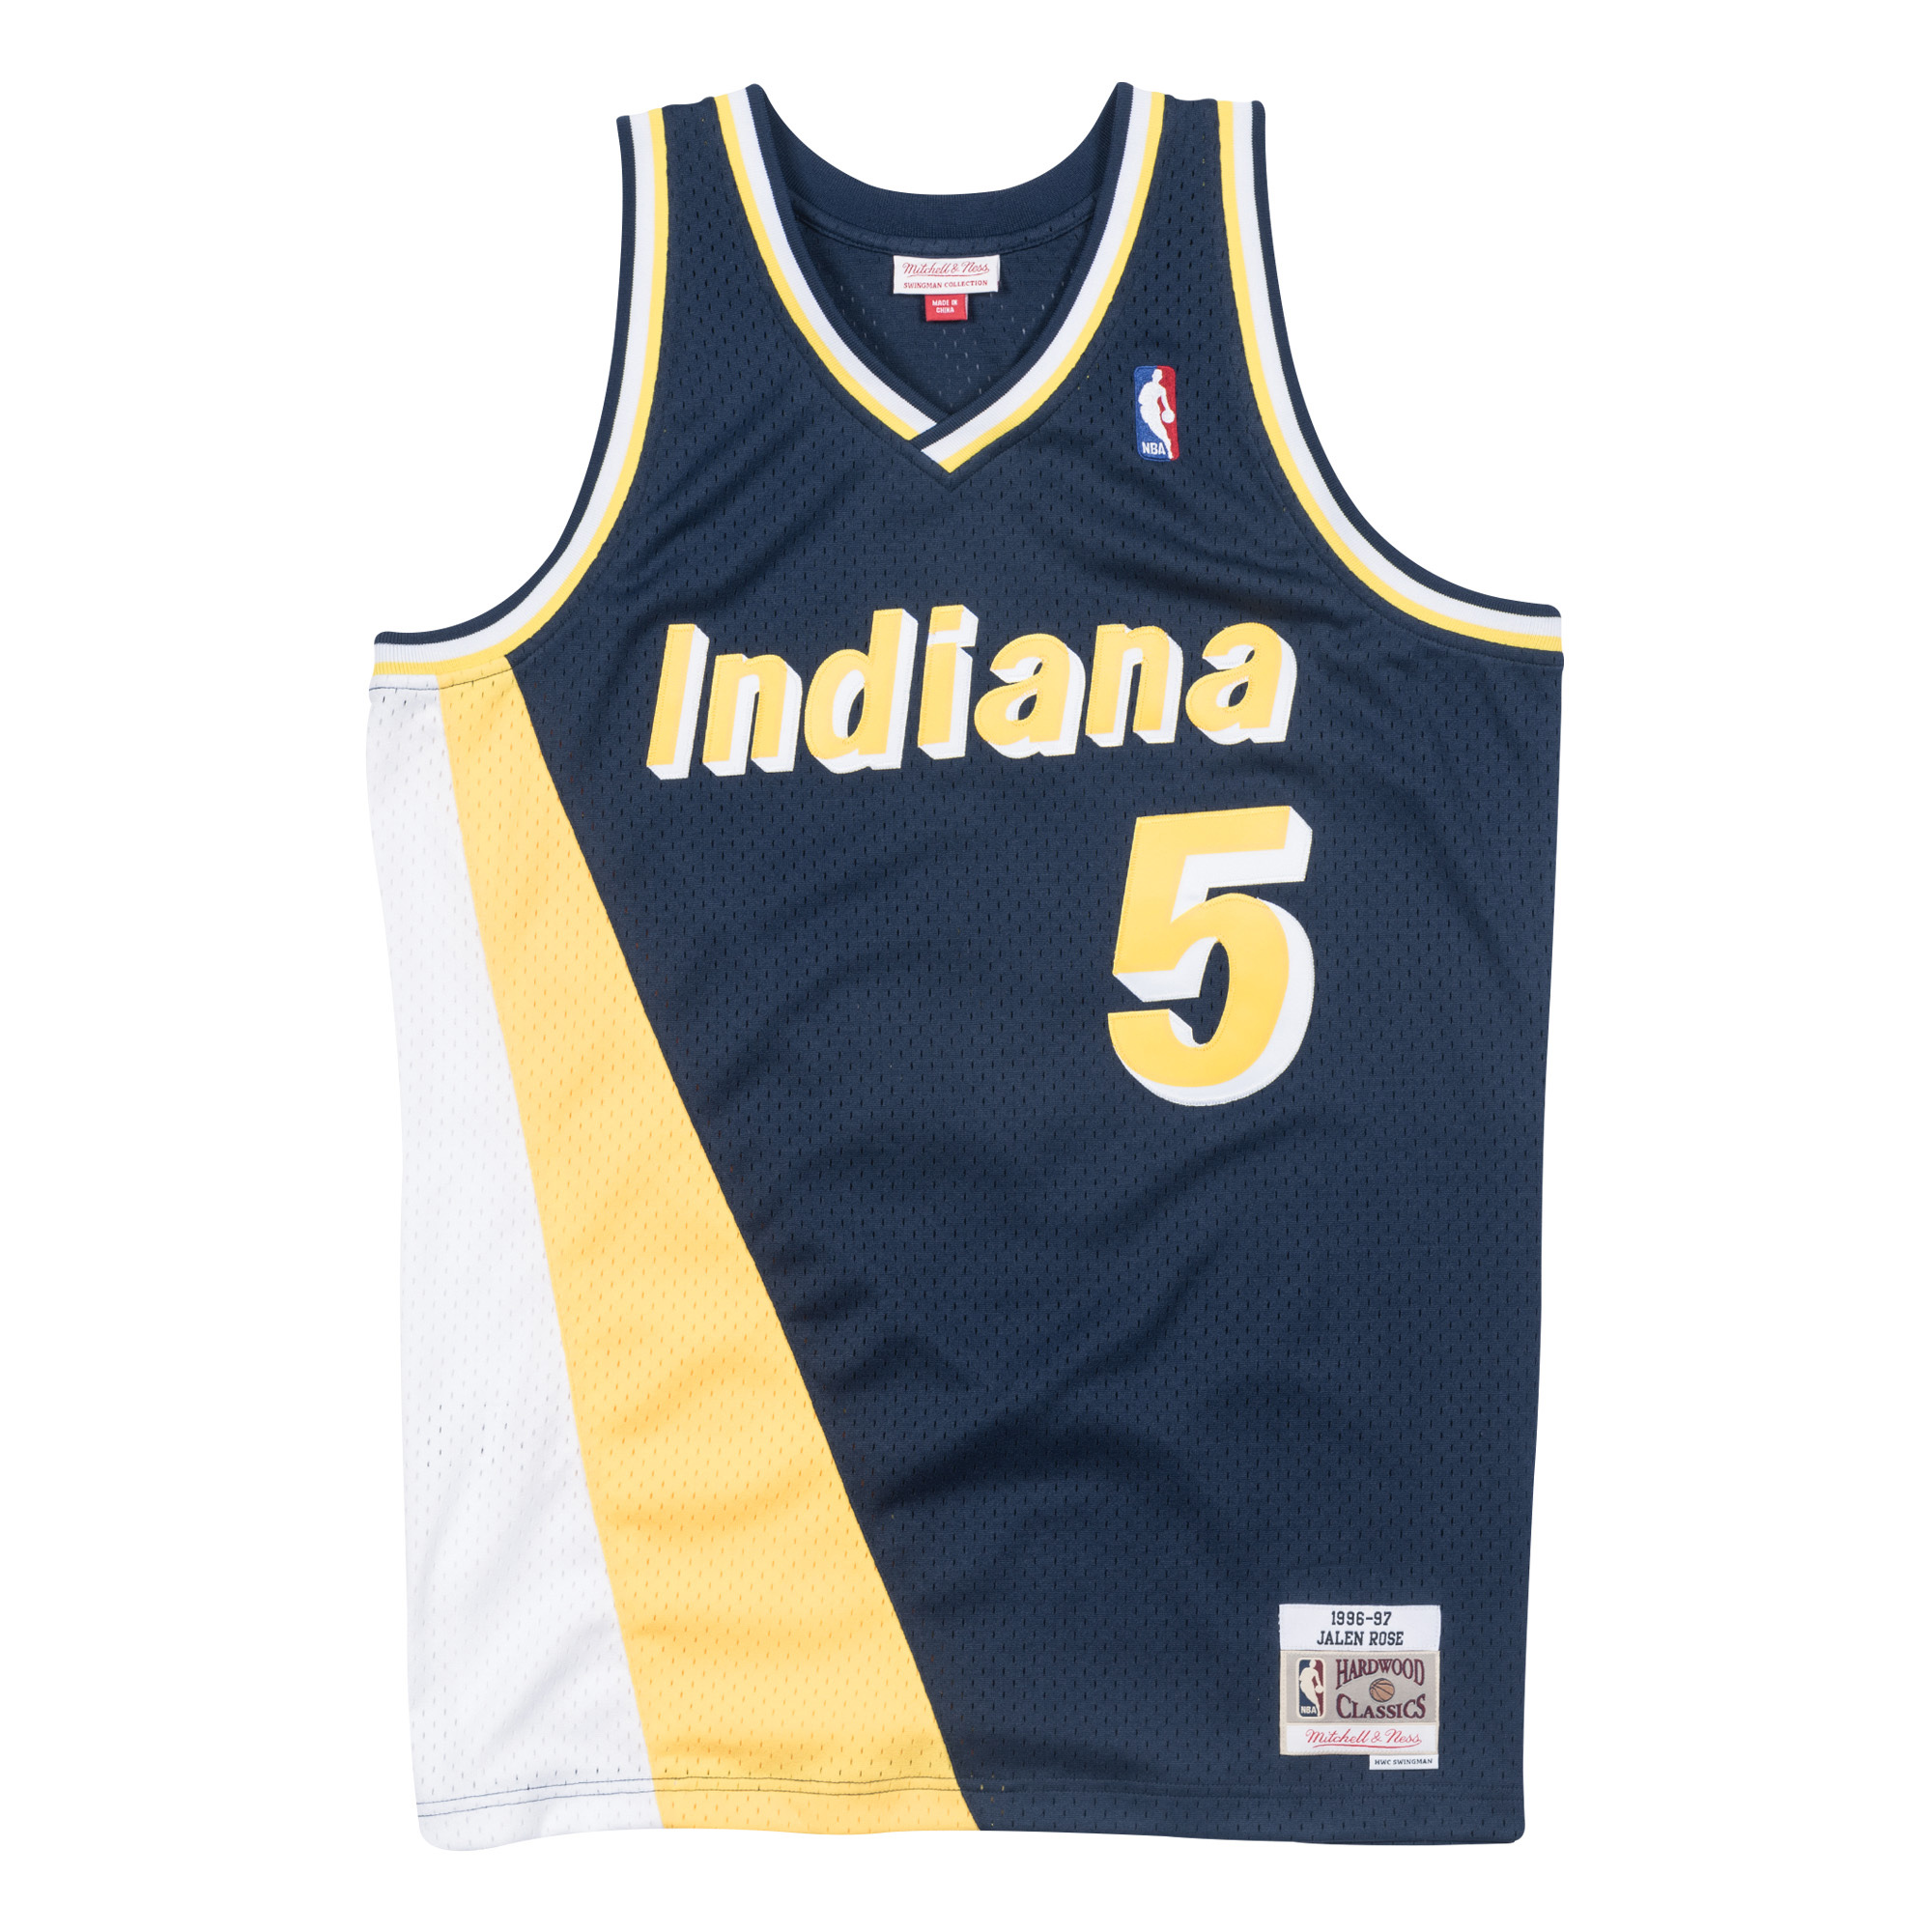 Mitchell And Ness Nba Swingman Jersey Indiana Pacers 96-97 - Jalen Rose, Navy